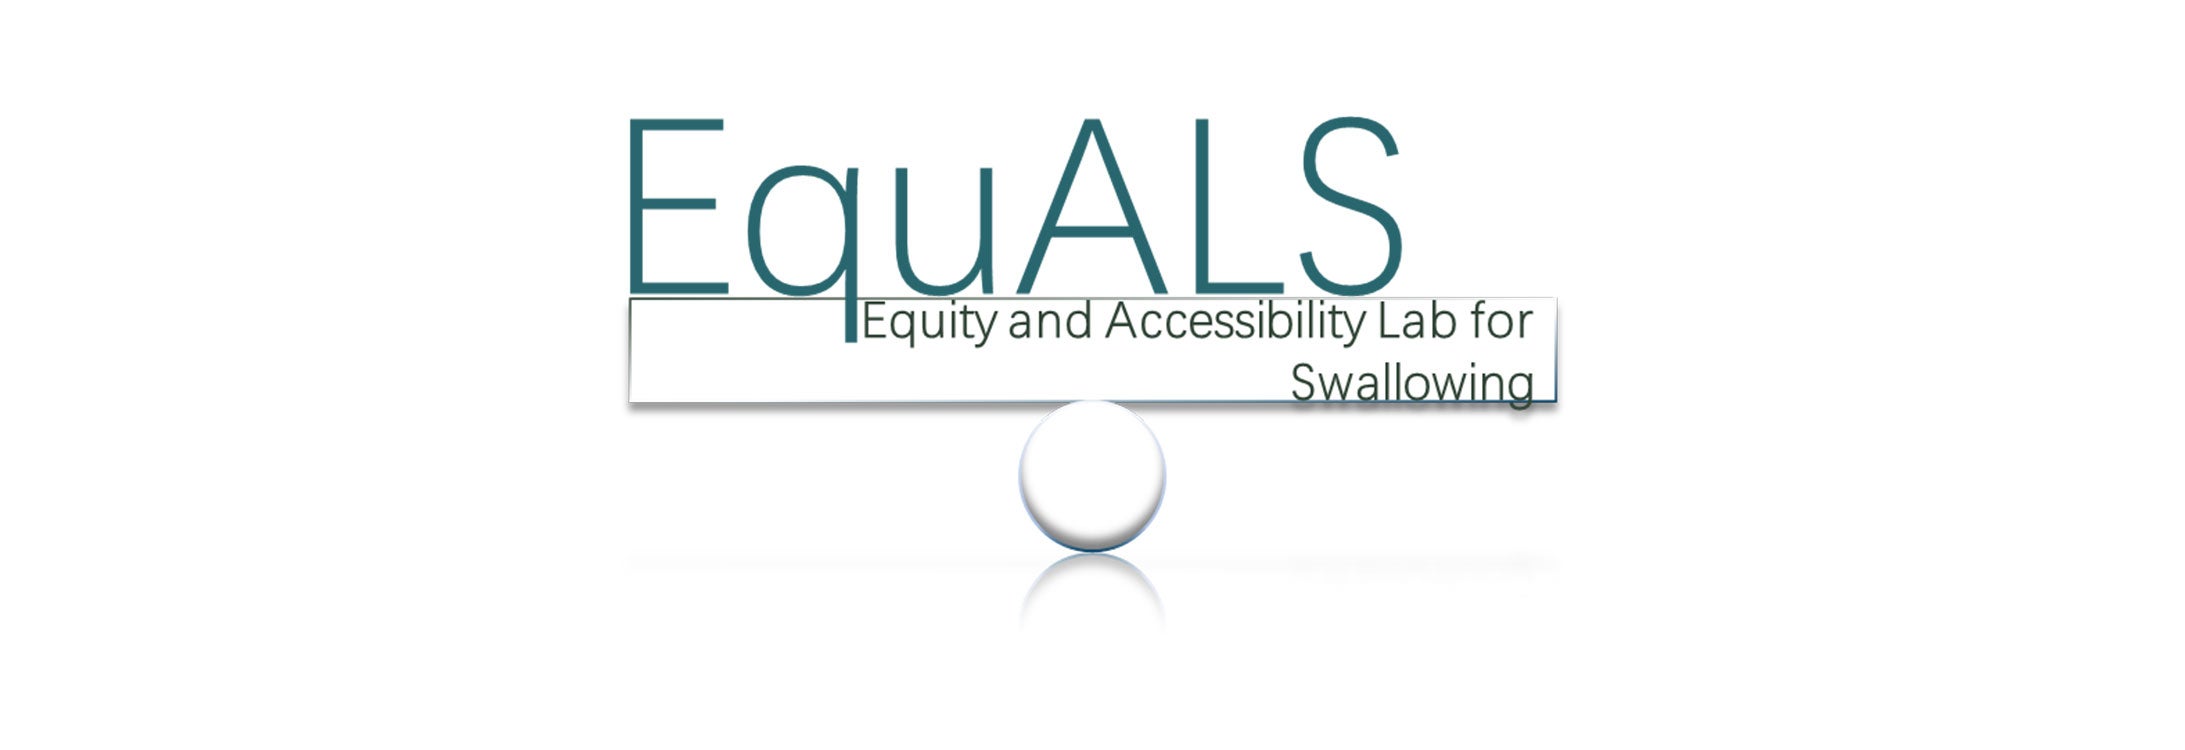 EquALS: Equity and Accessibility Lab for Swallowing